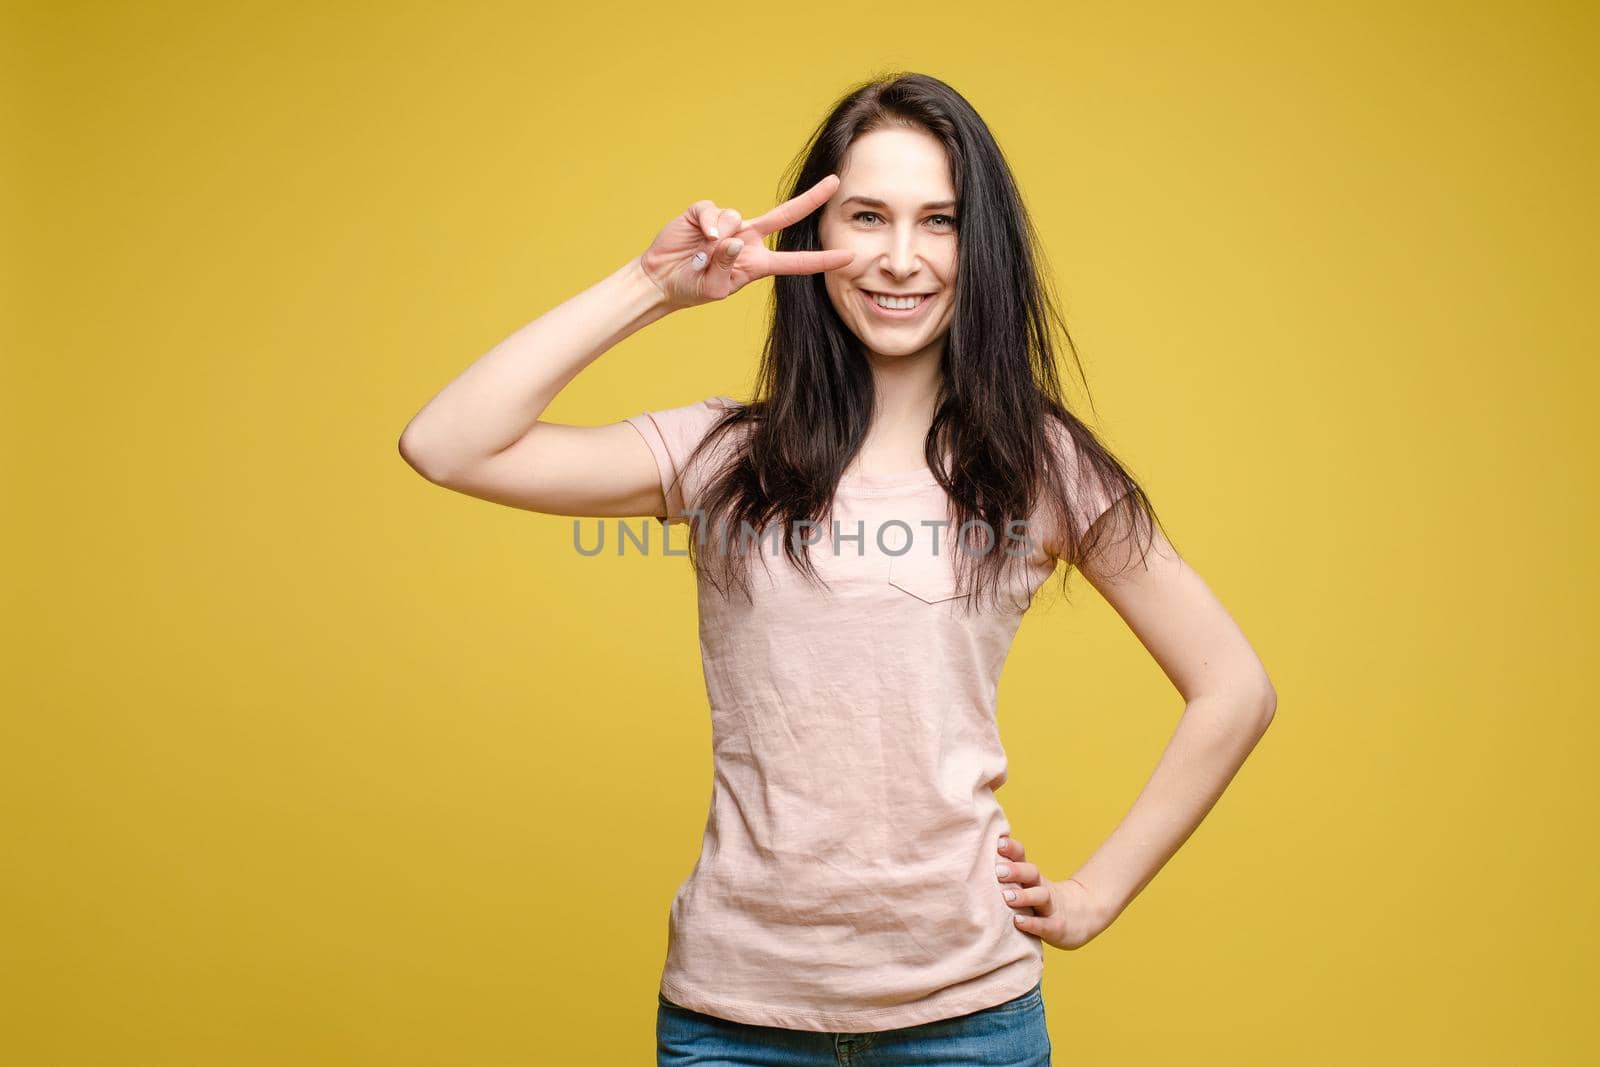 Studio portrait of charming brunette young woman in white top and green skirt holding peace sign near her eye. She is smiling at camera. Isolate on orange.